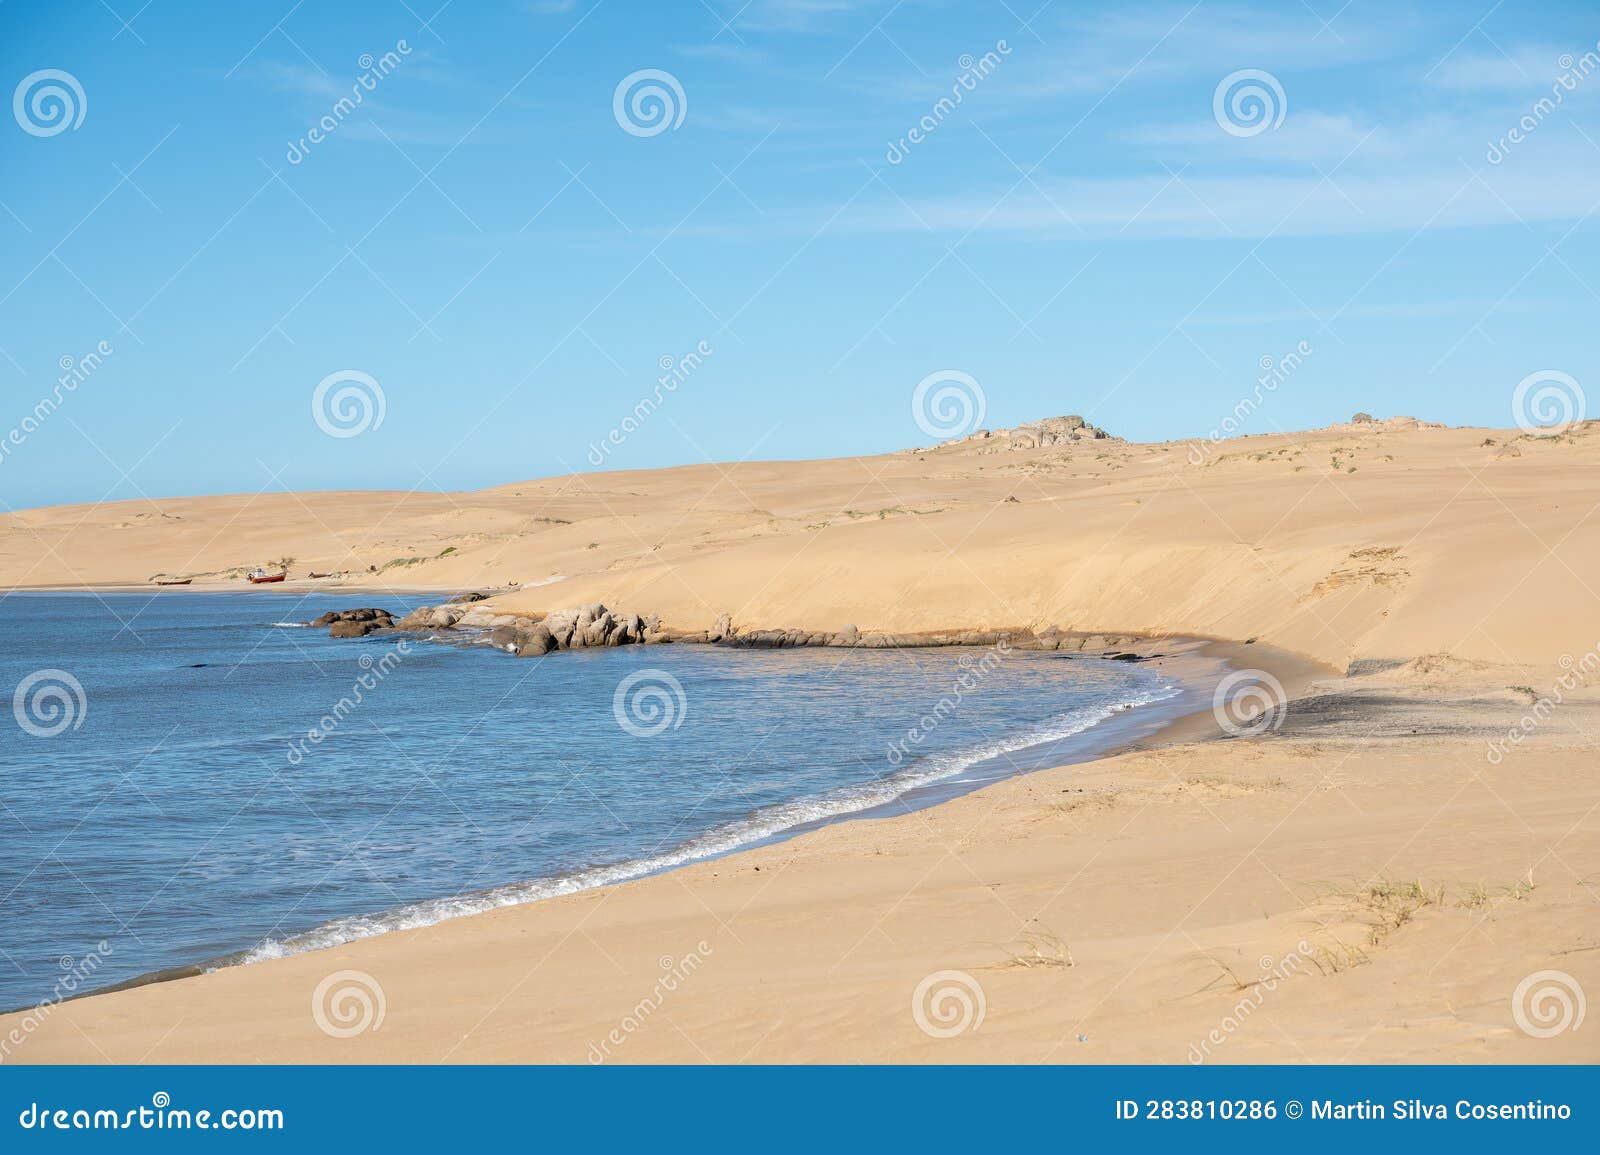 dunes of the cabo polonia national park in the department of rocha in uruguay